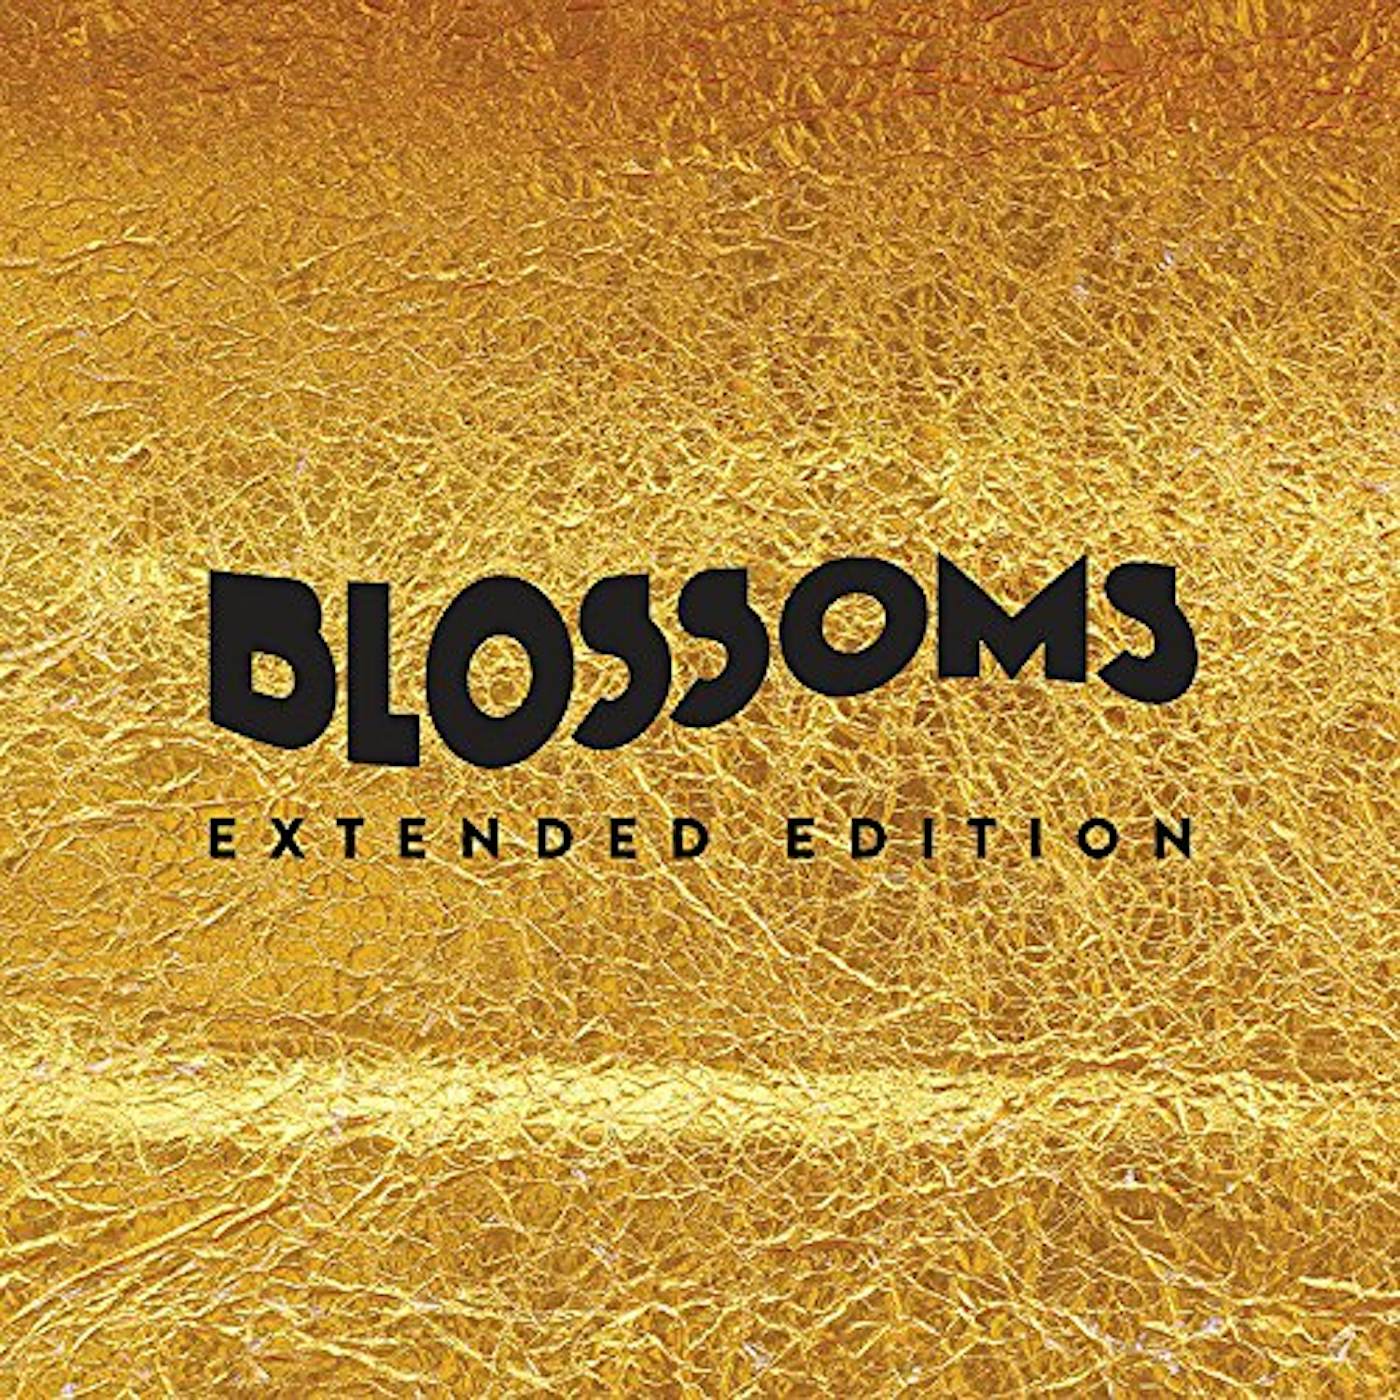 BLOSSOMS: EXTENDED EDITION CD